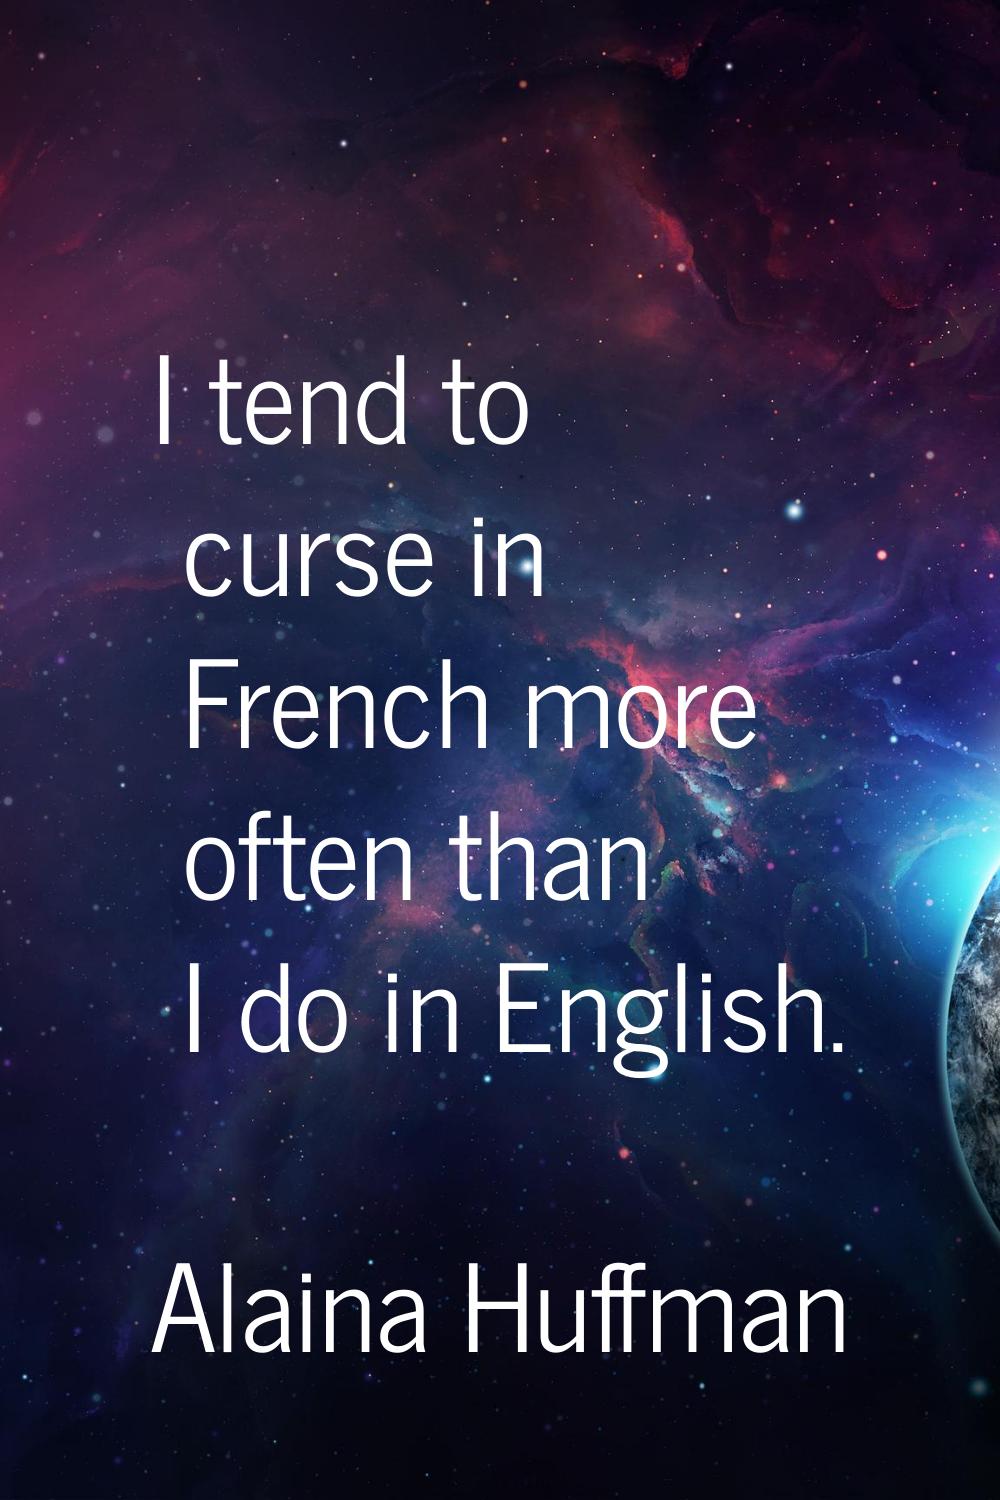 I tend to curse in French more often than I do in English.